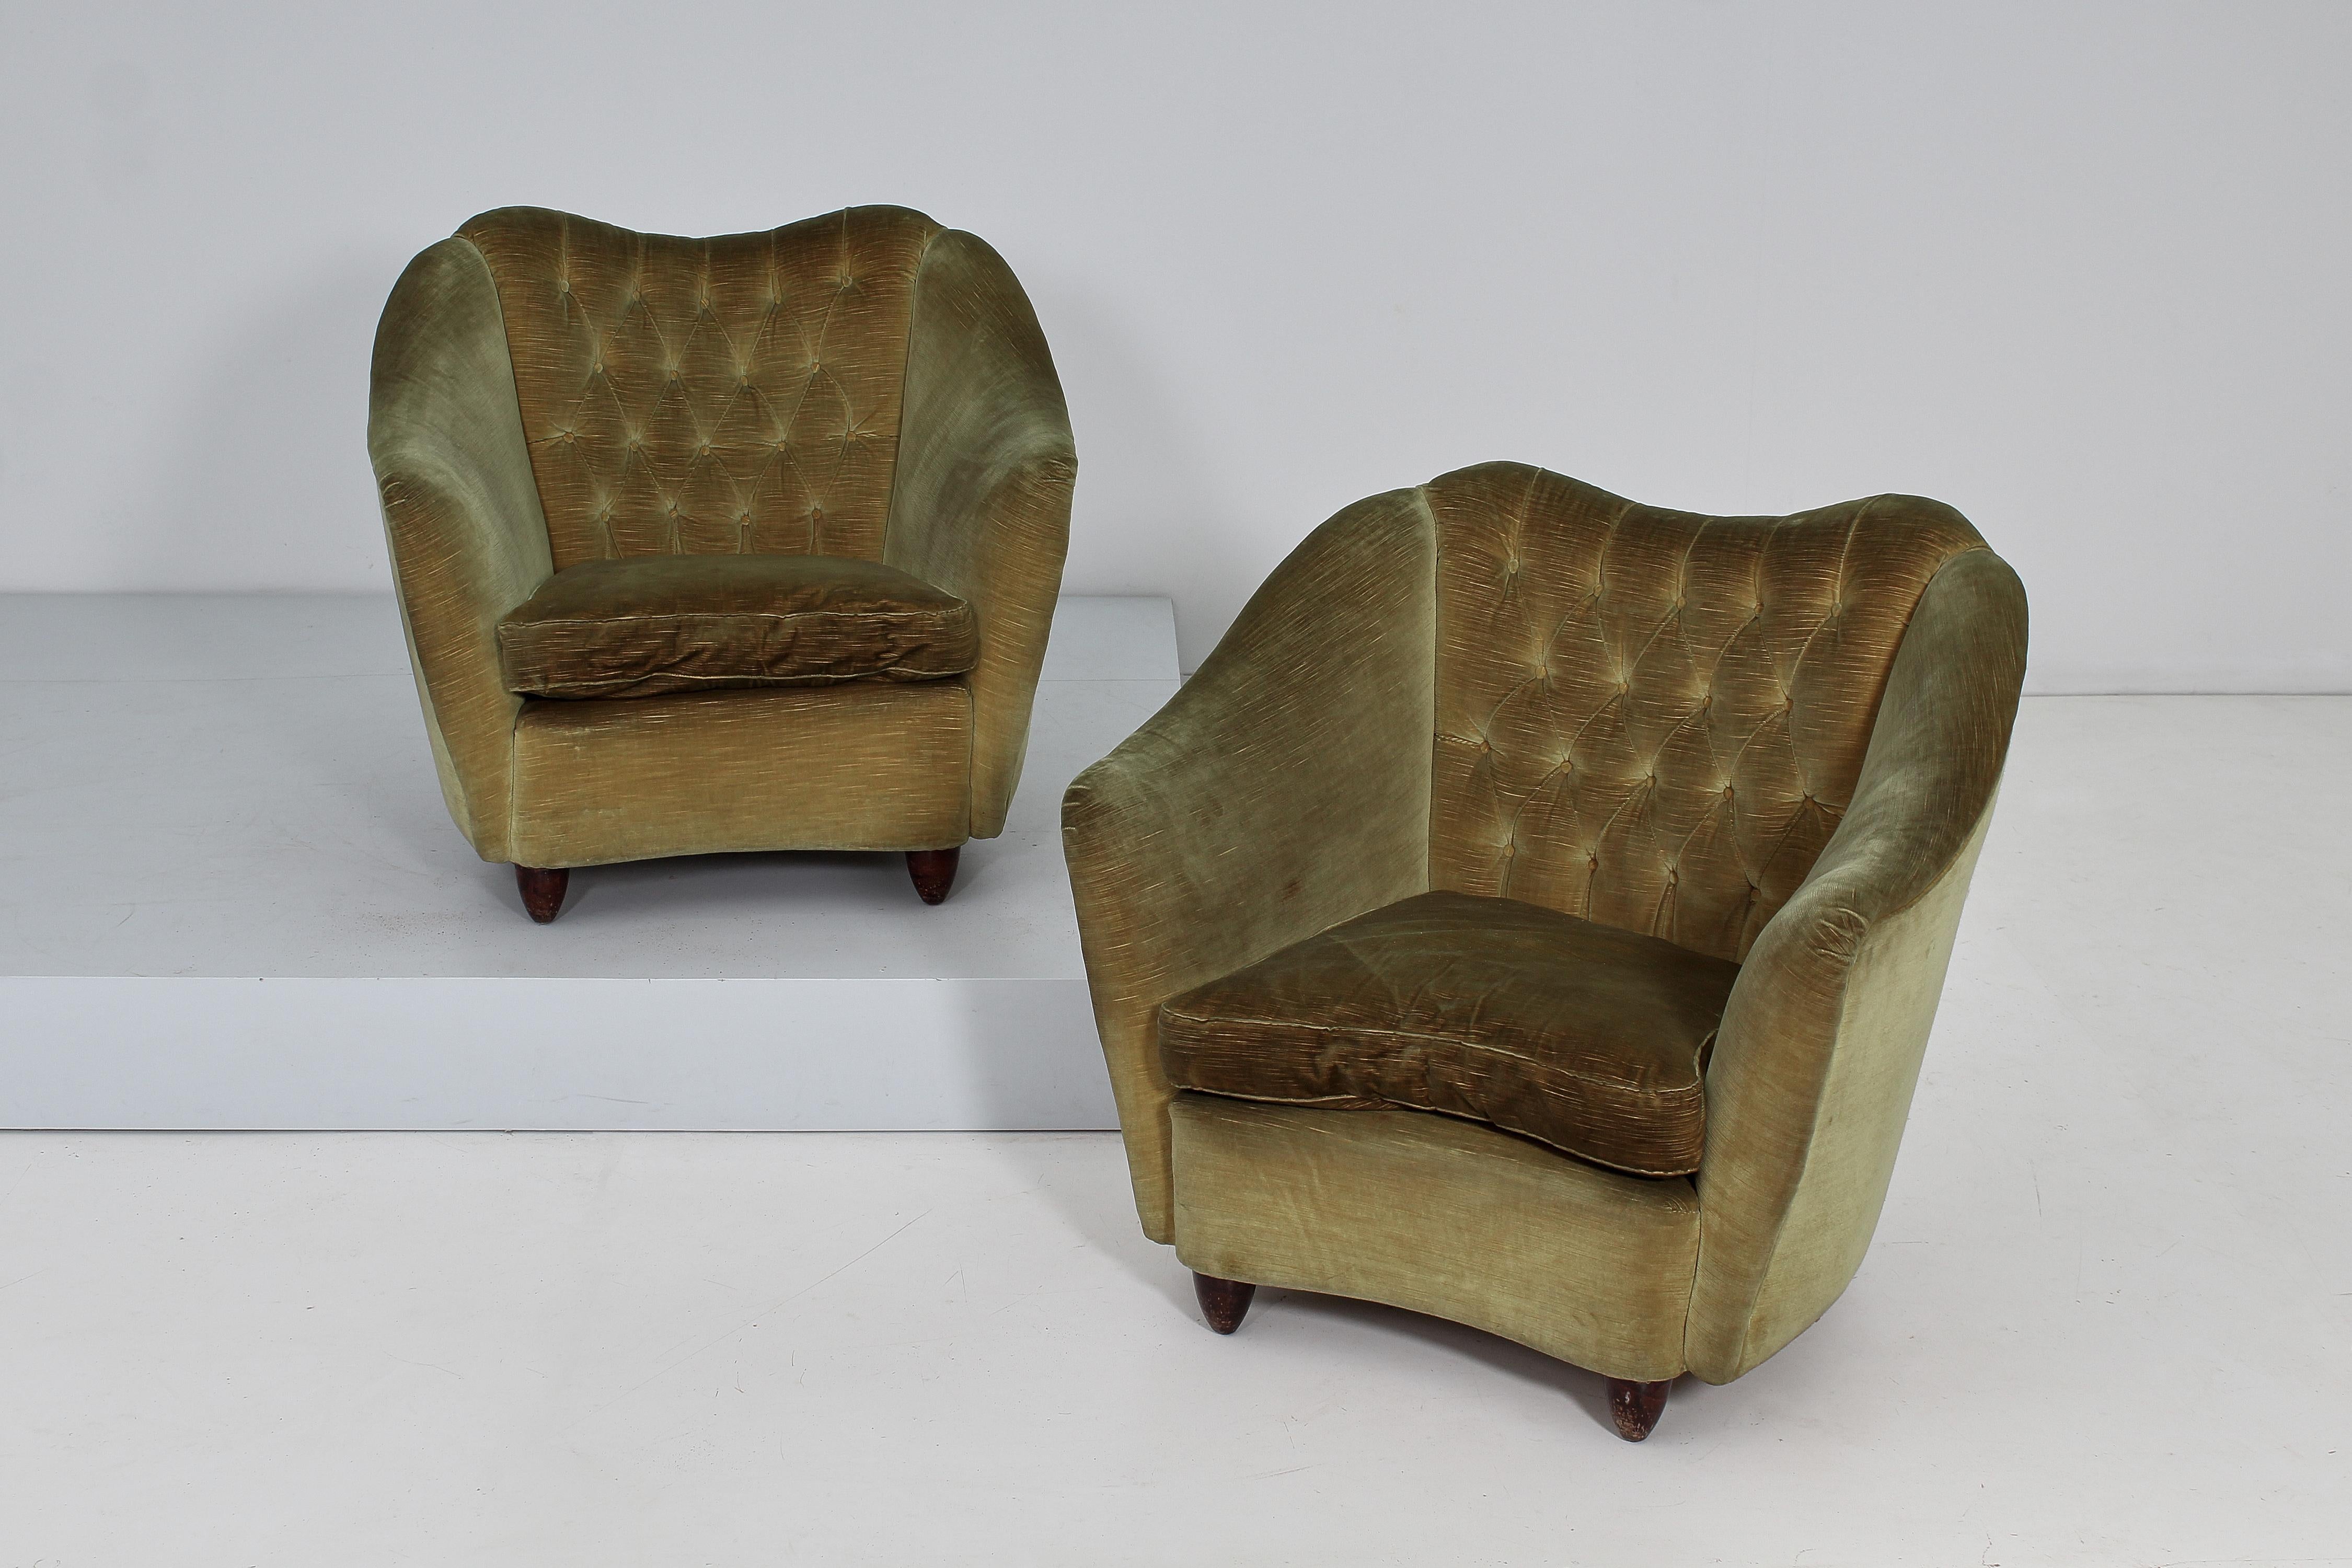 Set of 2 stylish armchairs with wooden structure, upholstered in dark green velvet with tufted backrest. In the style of Gio Ponti, 